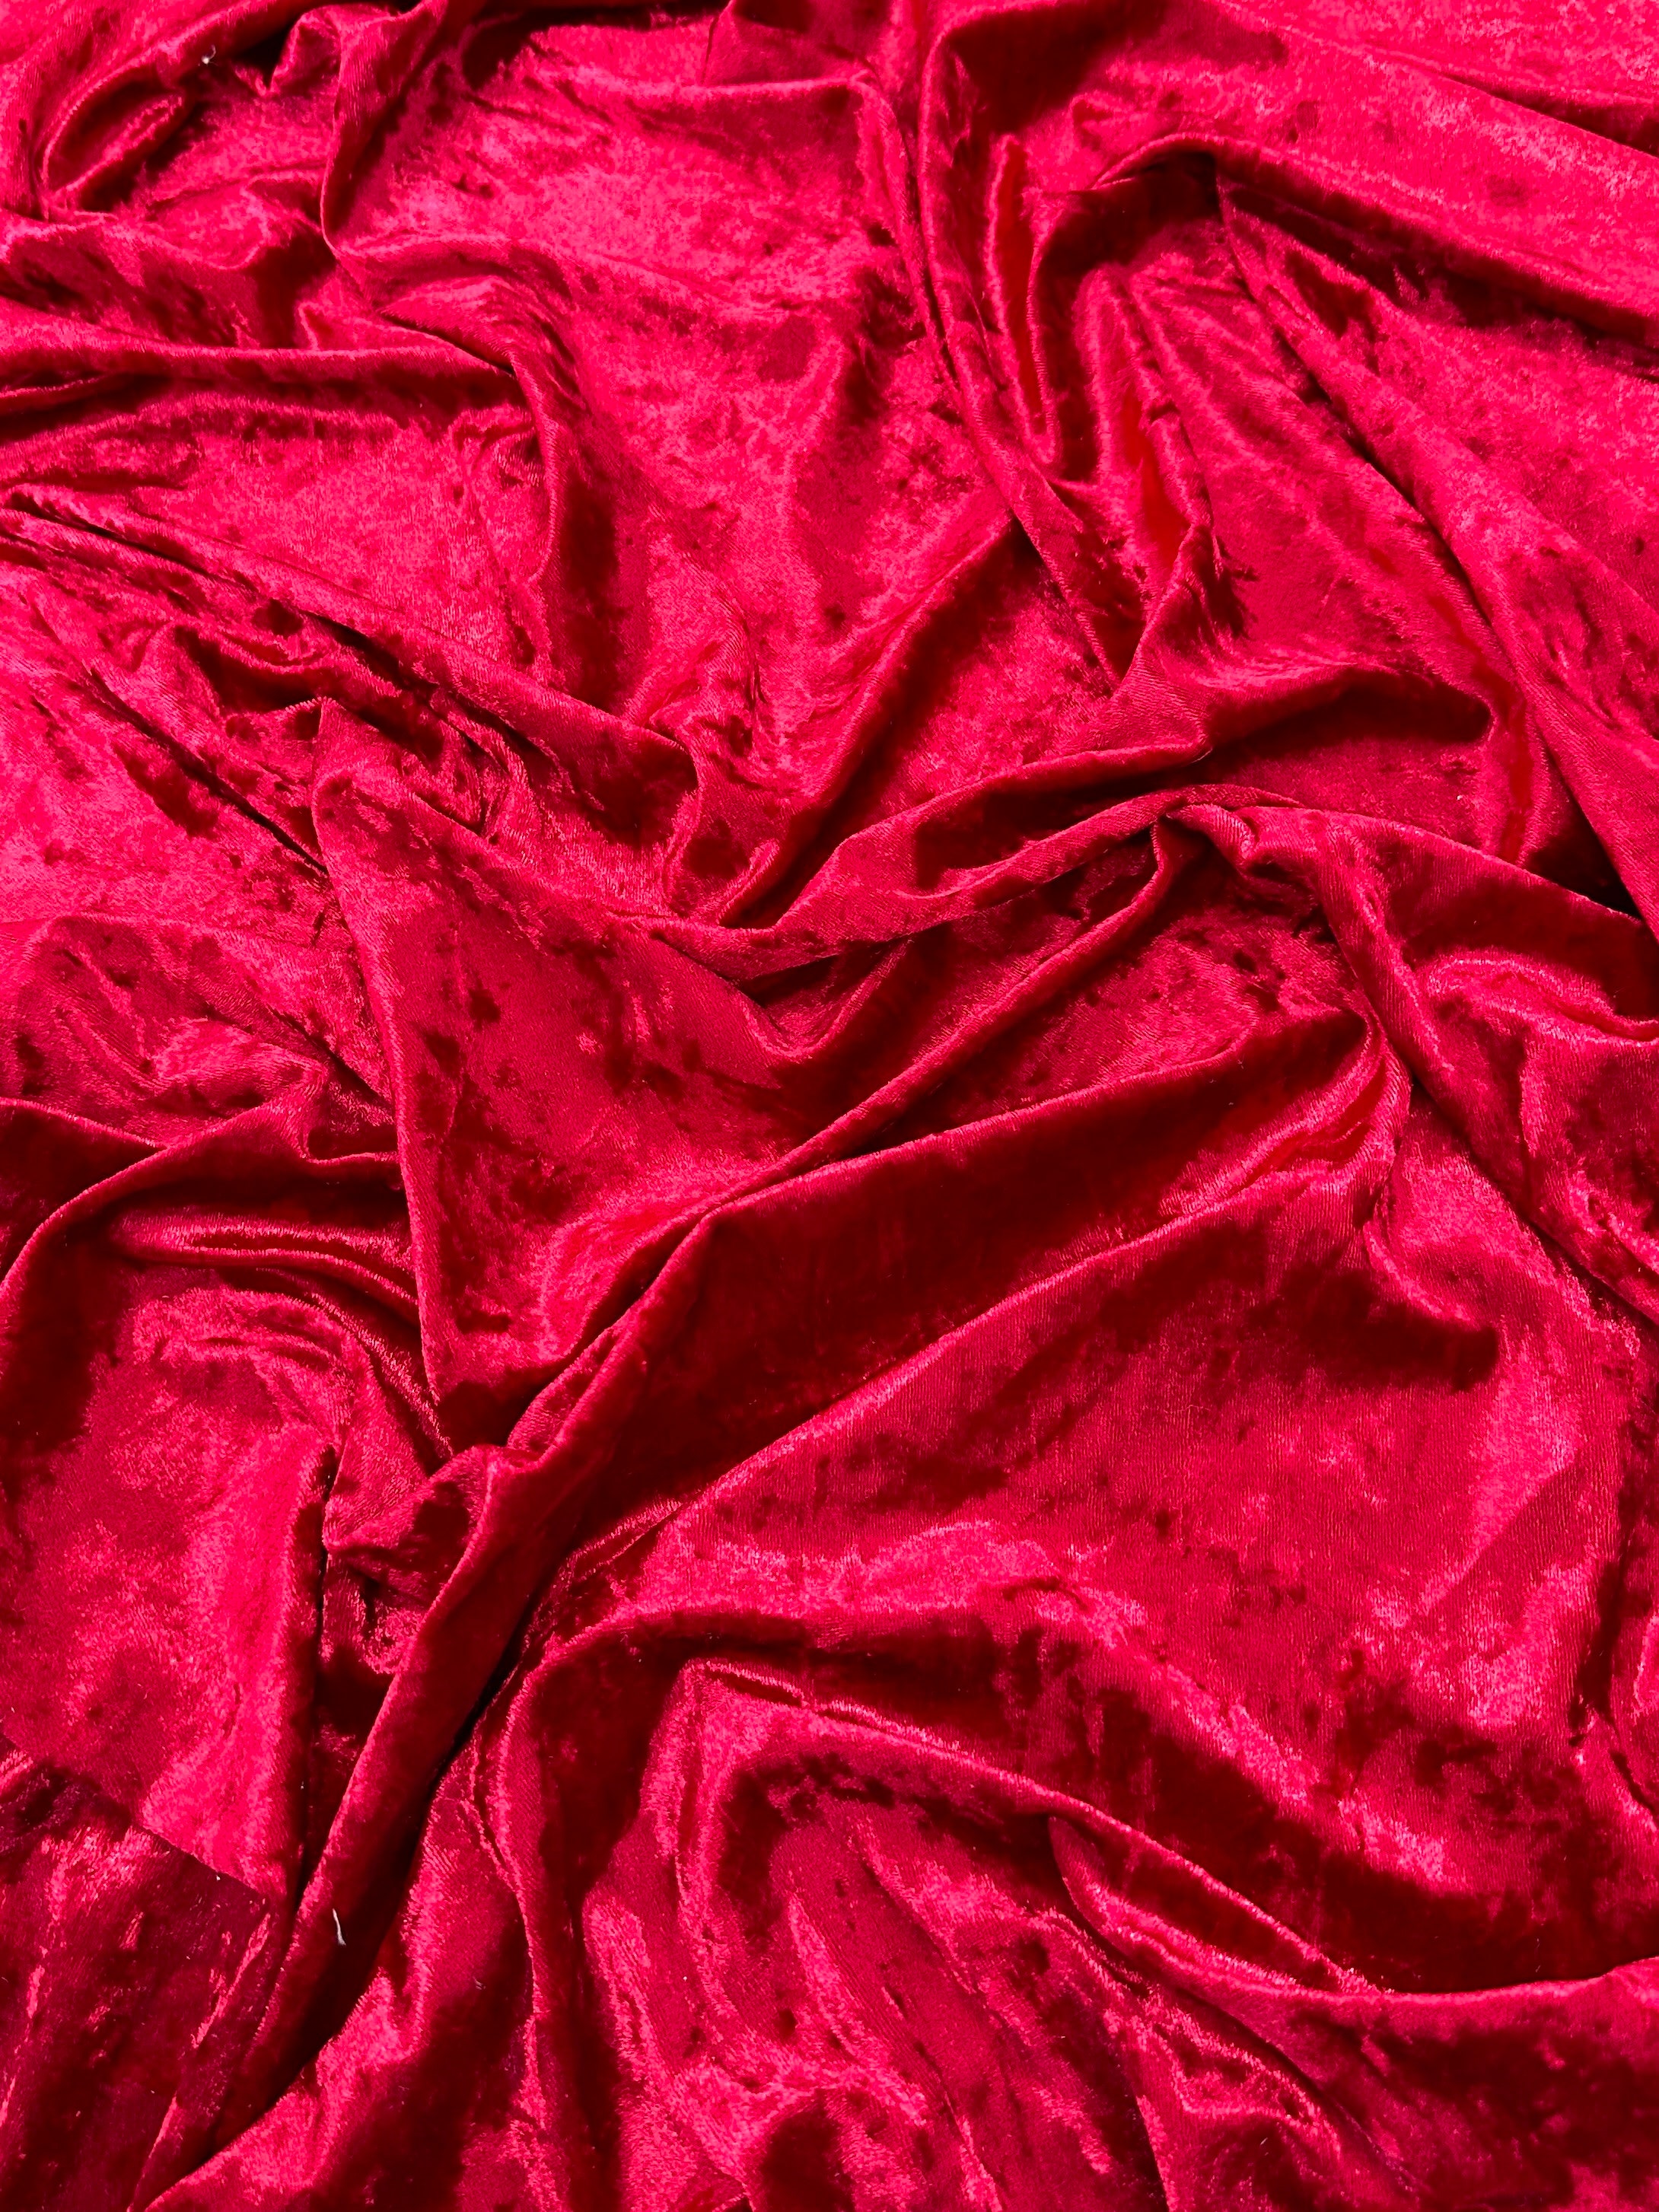 PREMIUM QUALITY Red Crushed Velvet Fabric by the Yard, Red Stretch Fabric  Polyester Spandex for Dresses, Scrunchies, Red Stretch Velour 